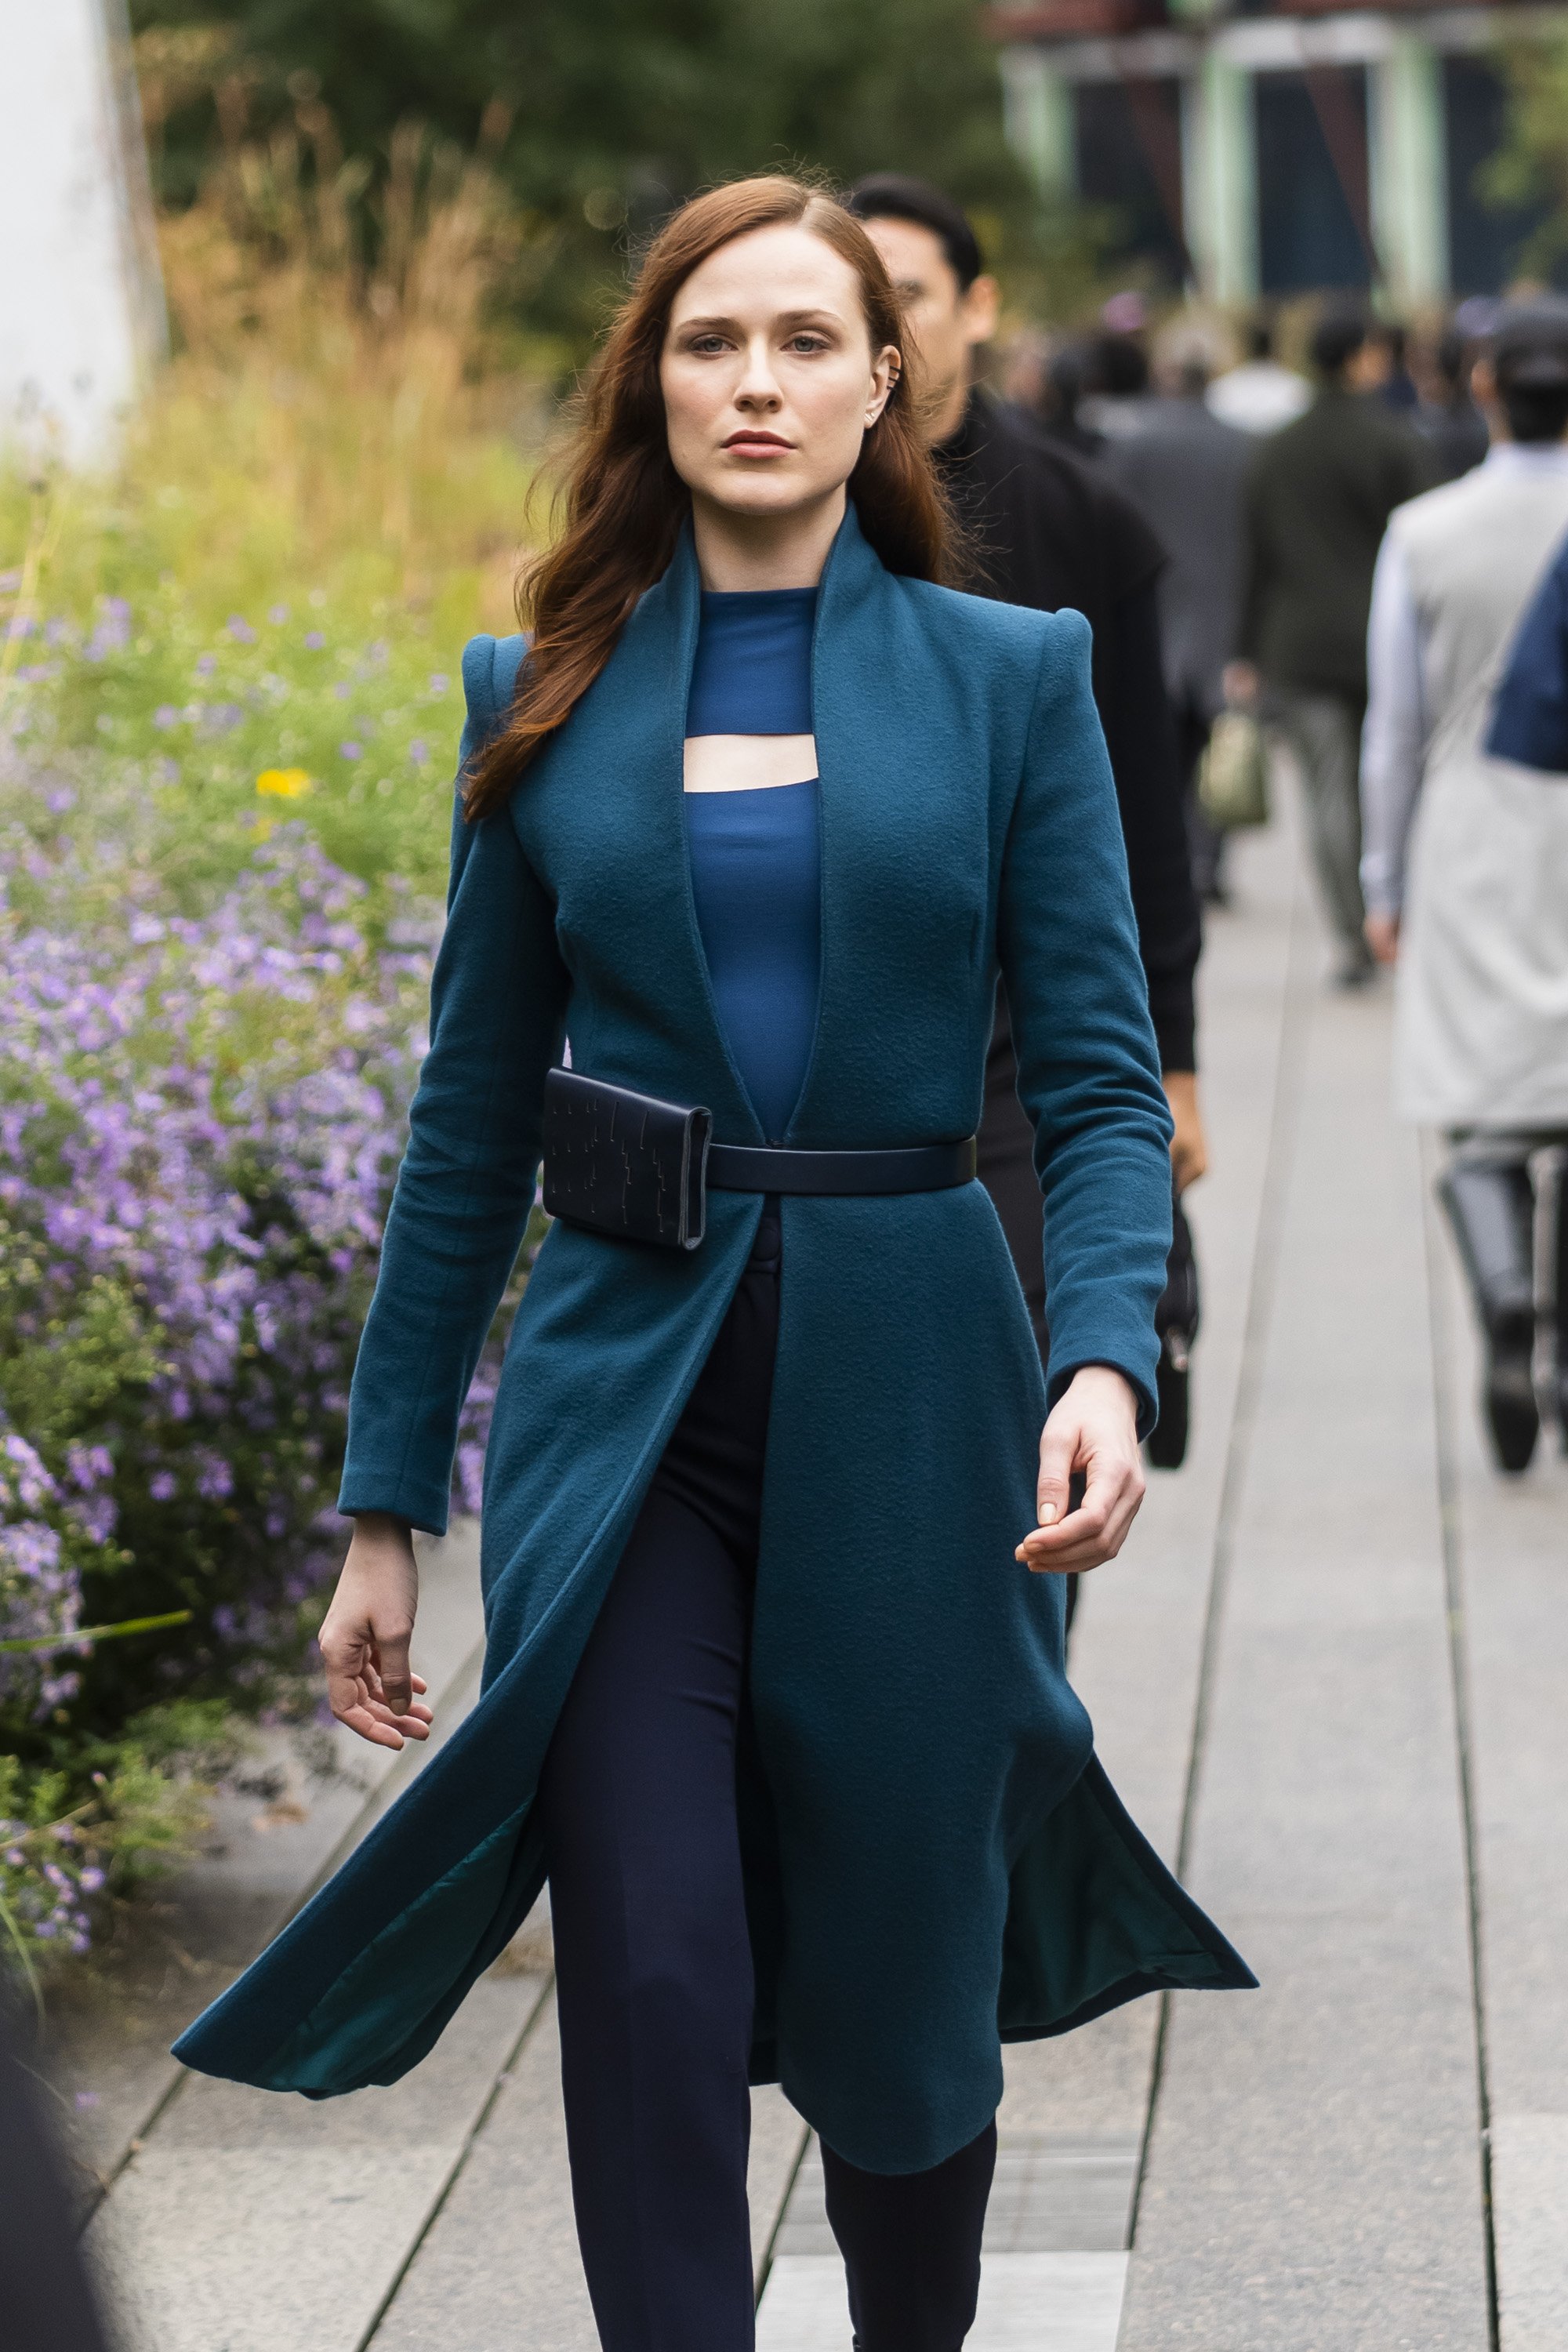 Evan Rachel Wood is seen filming "Westworld" on the Highline on October 05, 2021, in New York City. I Source: Getty Images